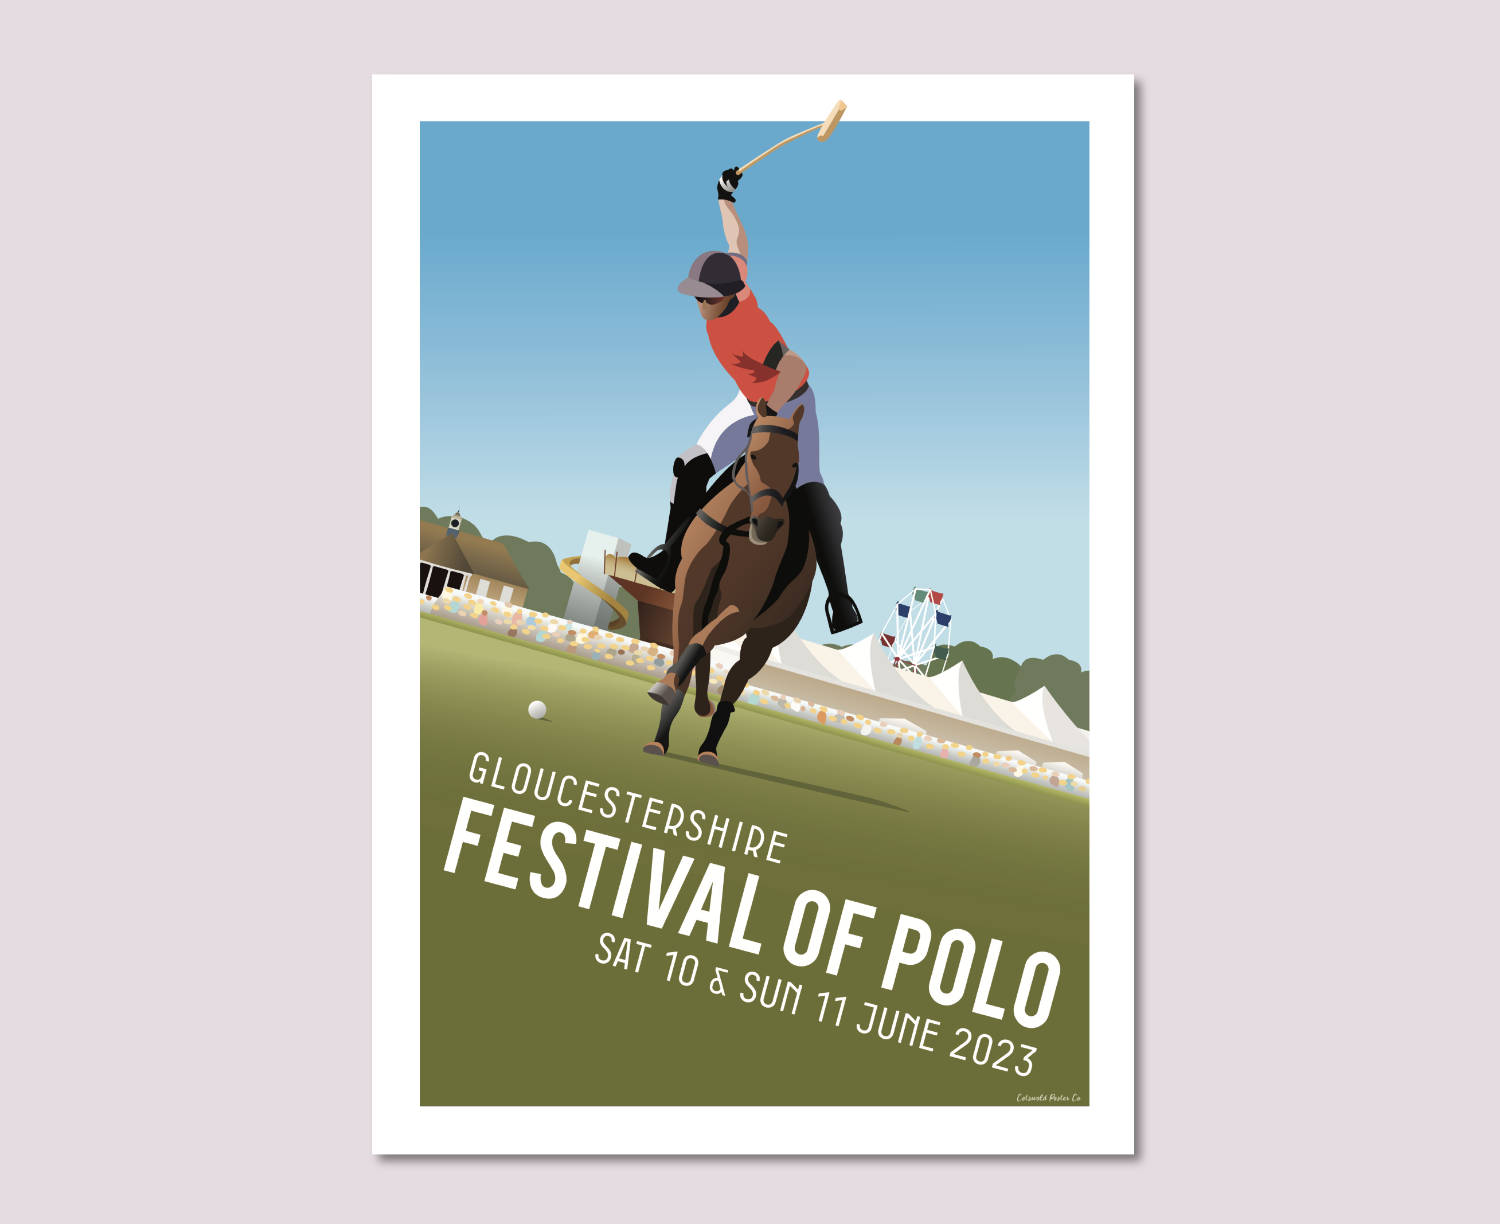 Gloucestershire Festival of Polo 2023 Poster Design